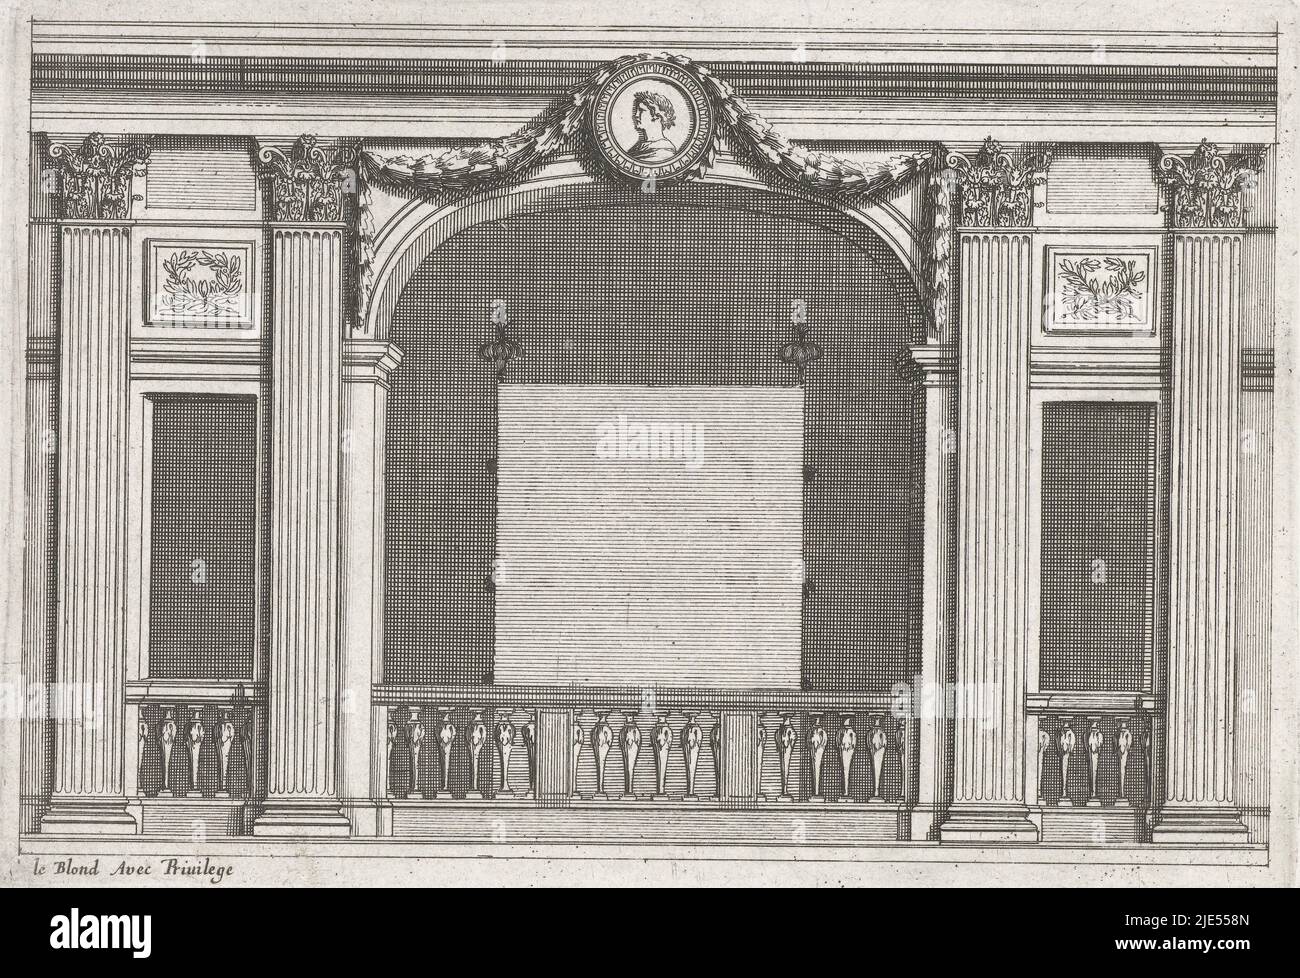 At the top centre hangs a round medallion with a portrait bust, on either side are two Corinthian pilasters.bOff series of 6 leaves, Alcove closed by balustrade Alkoven (series title), print maker: Jean Lepautre, Jean Lepautre, publisher: Jean Leblond (I), (mentioned on object), print maker: France, (possibly), France, (possibly), publisher: Paris, c. 1650, paper, etching, h 137 mm × w 197 mm Stock Photo